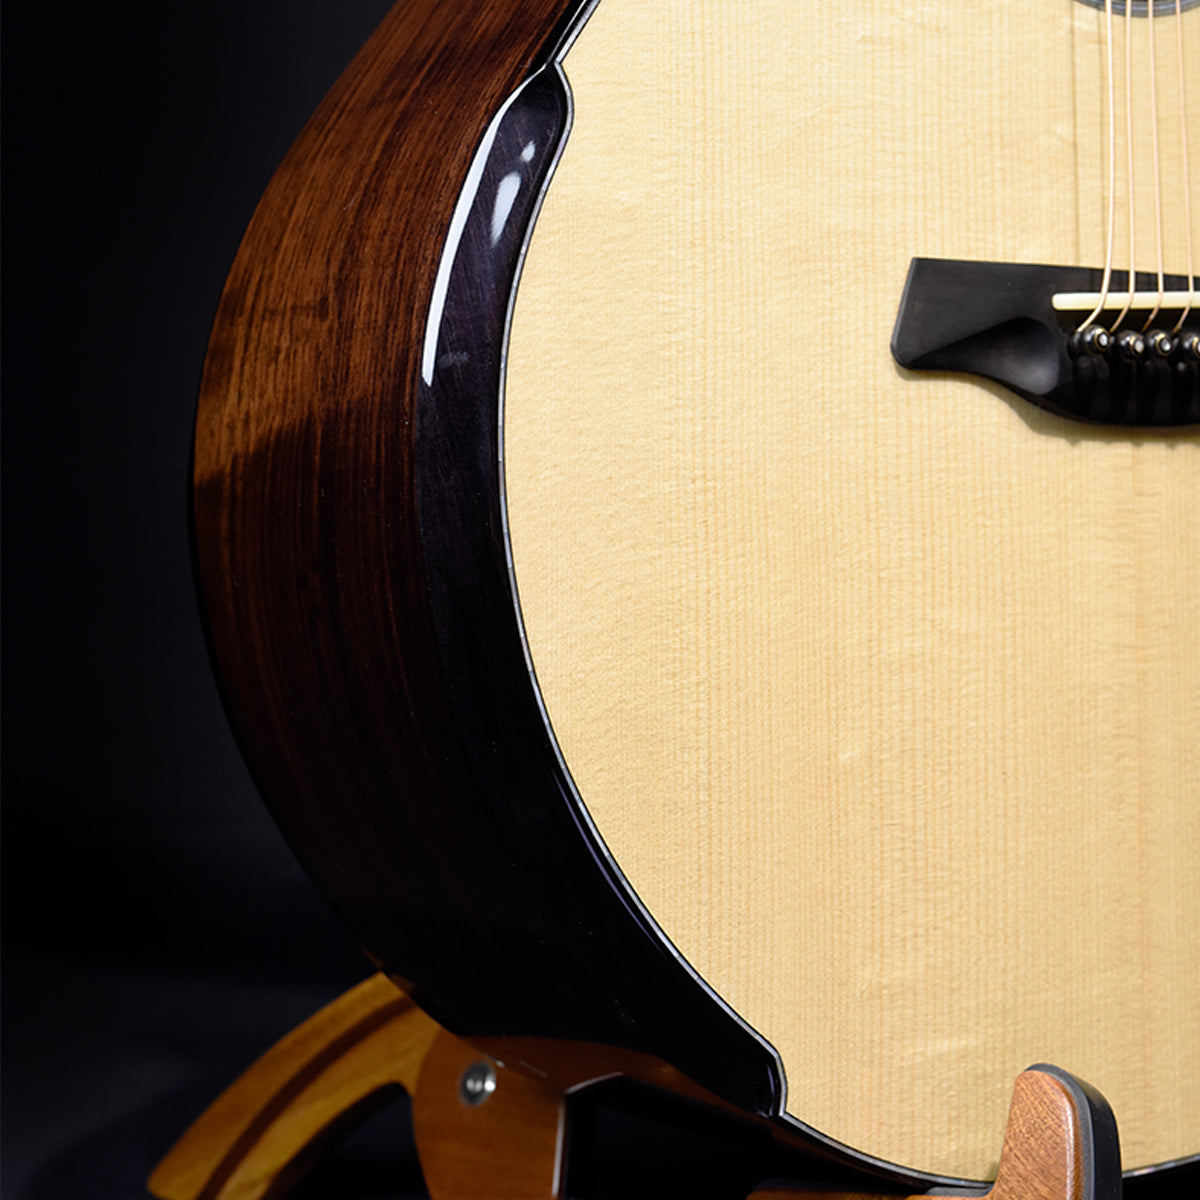 Blue Label SJ Swiss Spruce with Indian Rosewood | #222